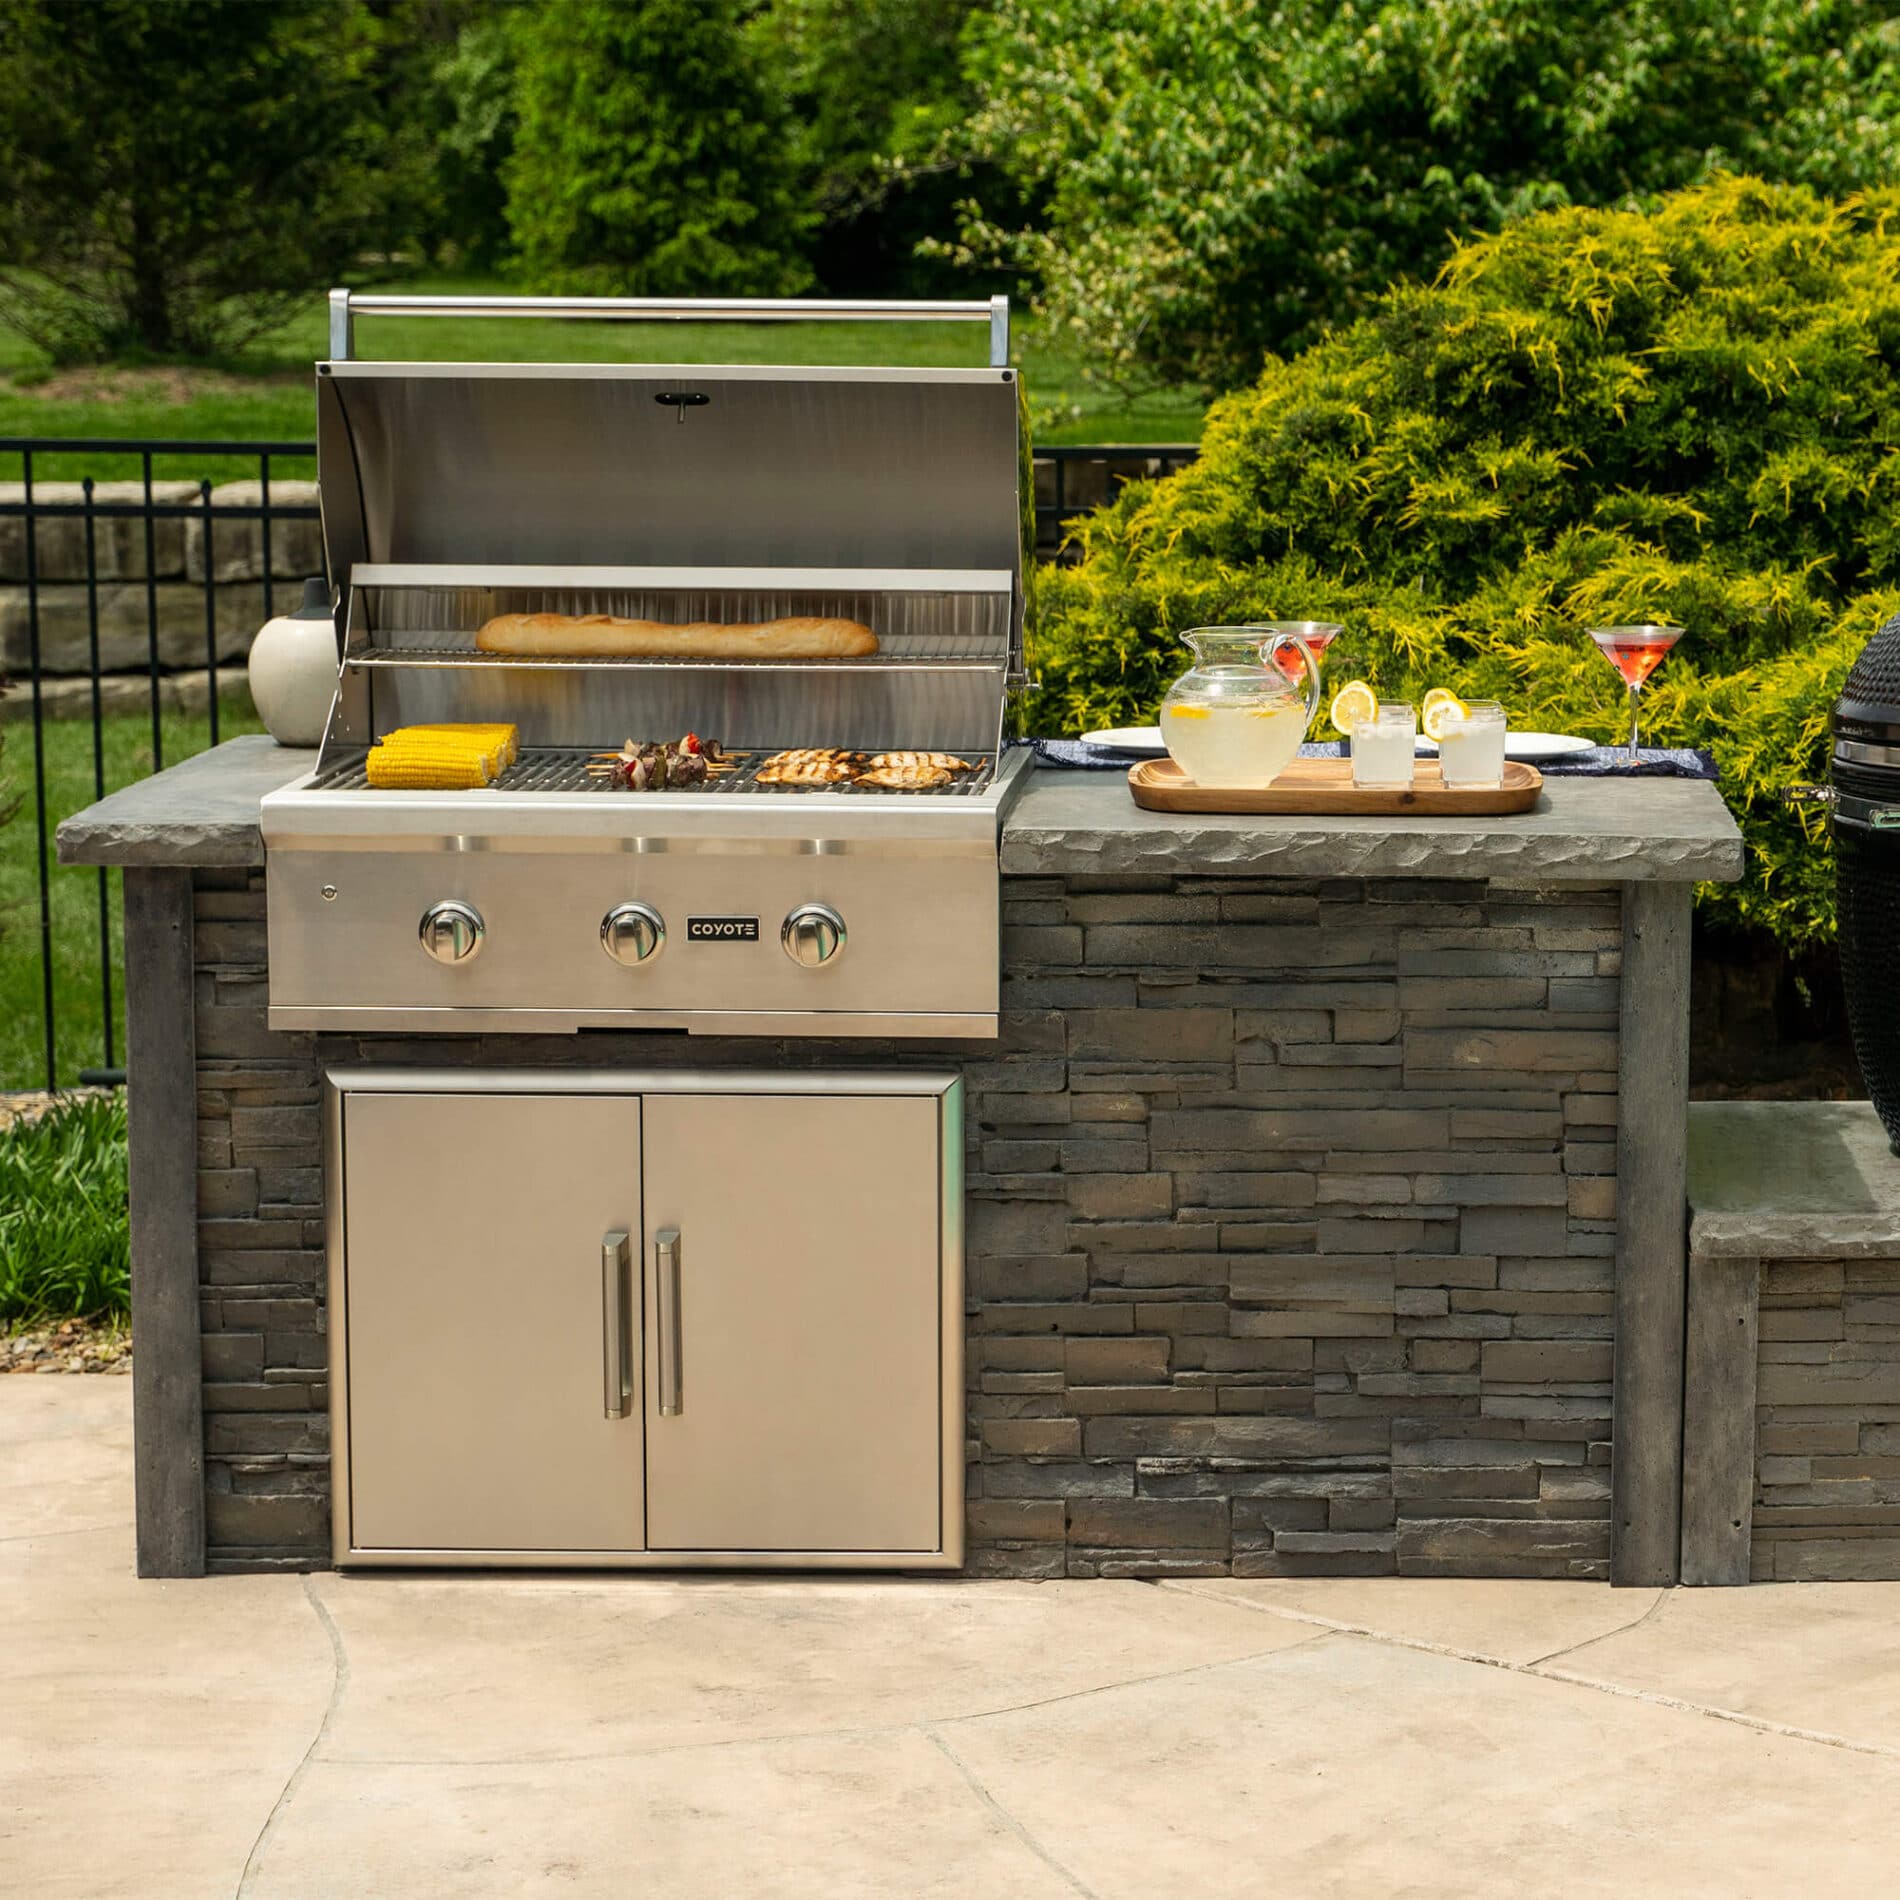 6 Outdoor Kitchens with Built-in Barbeques